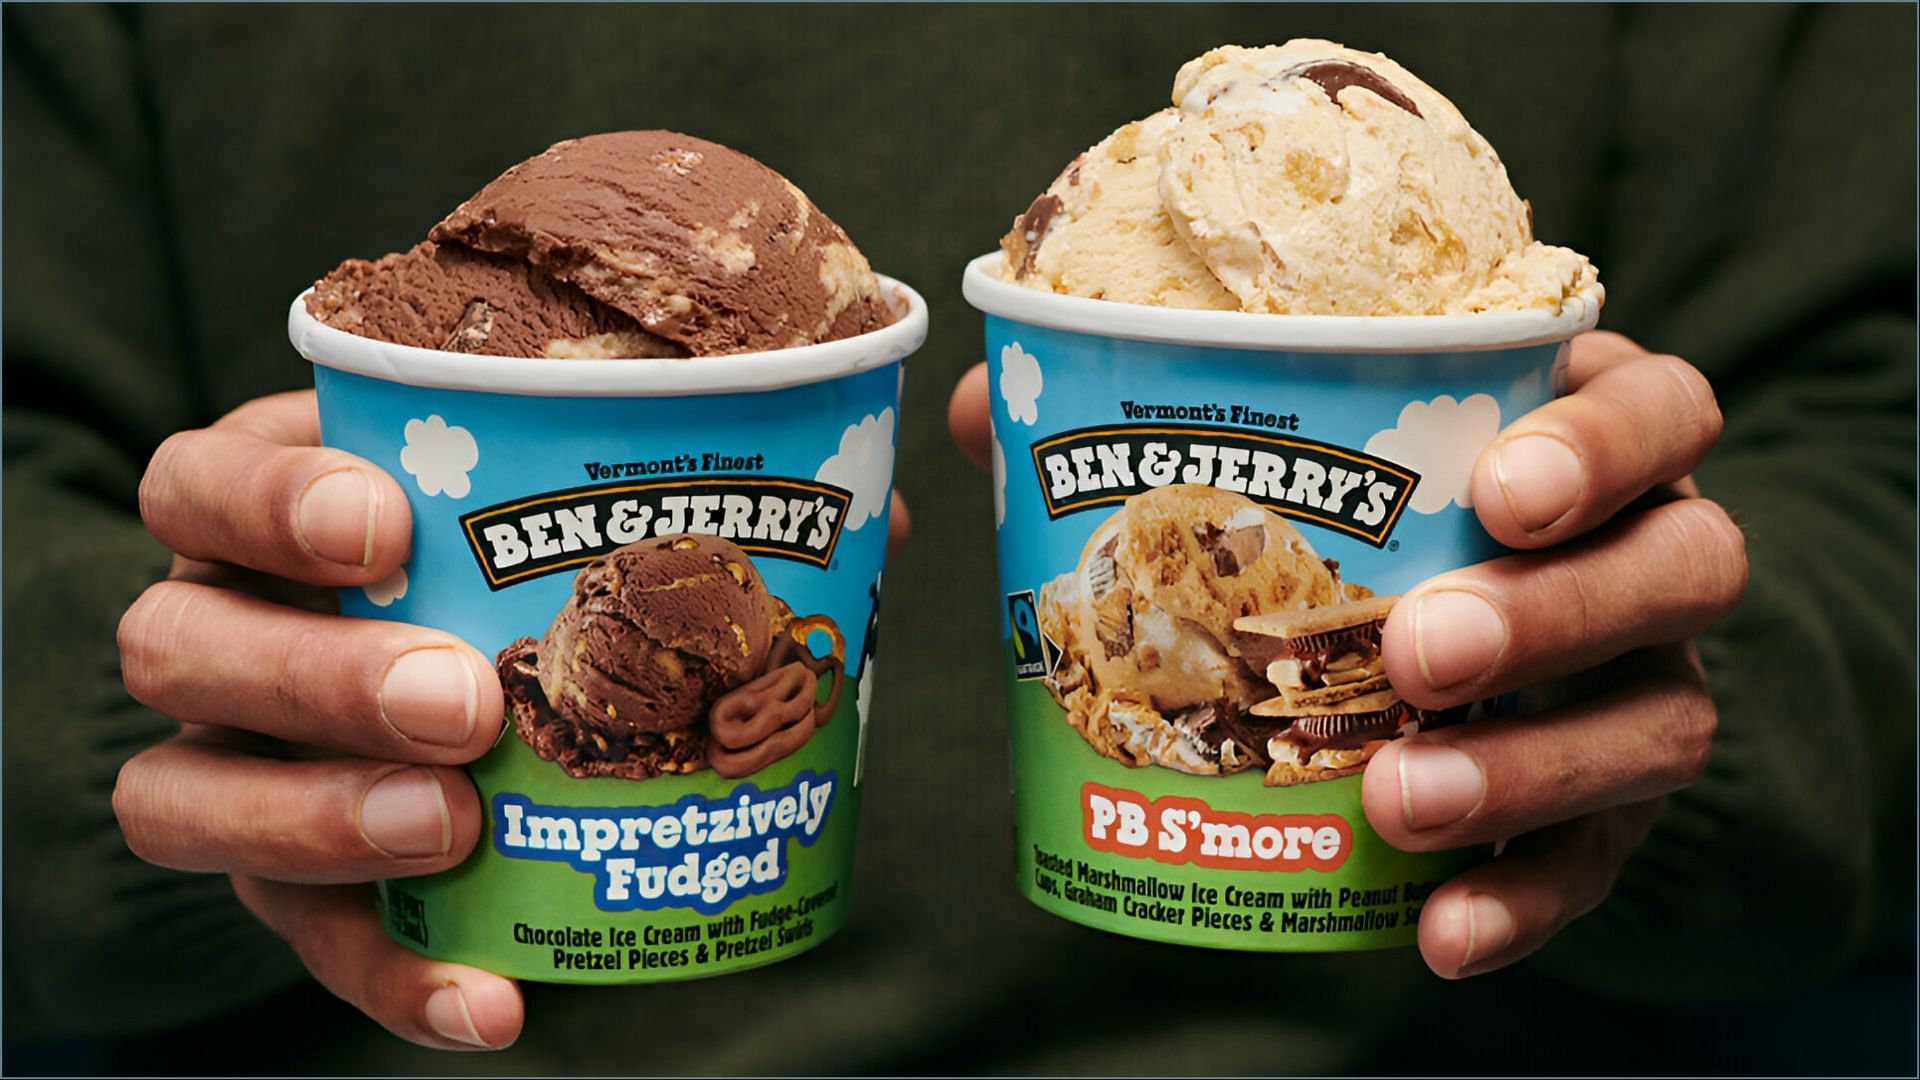 Ben &amp; Jerry&rsquo;s introduces two new PB S&rsquo;more and Impretzively Fudged ice cream flavors (Image via Ben &amp; Jerry&rsquo;s)